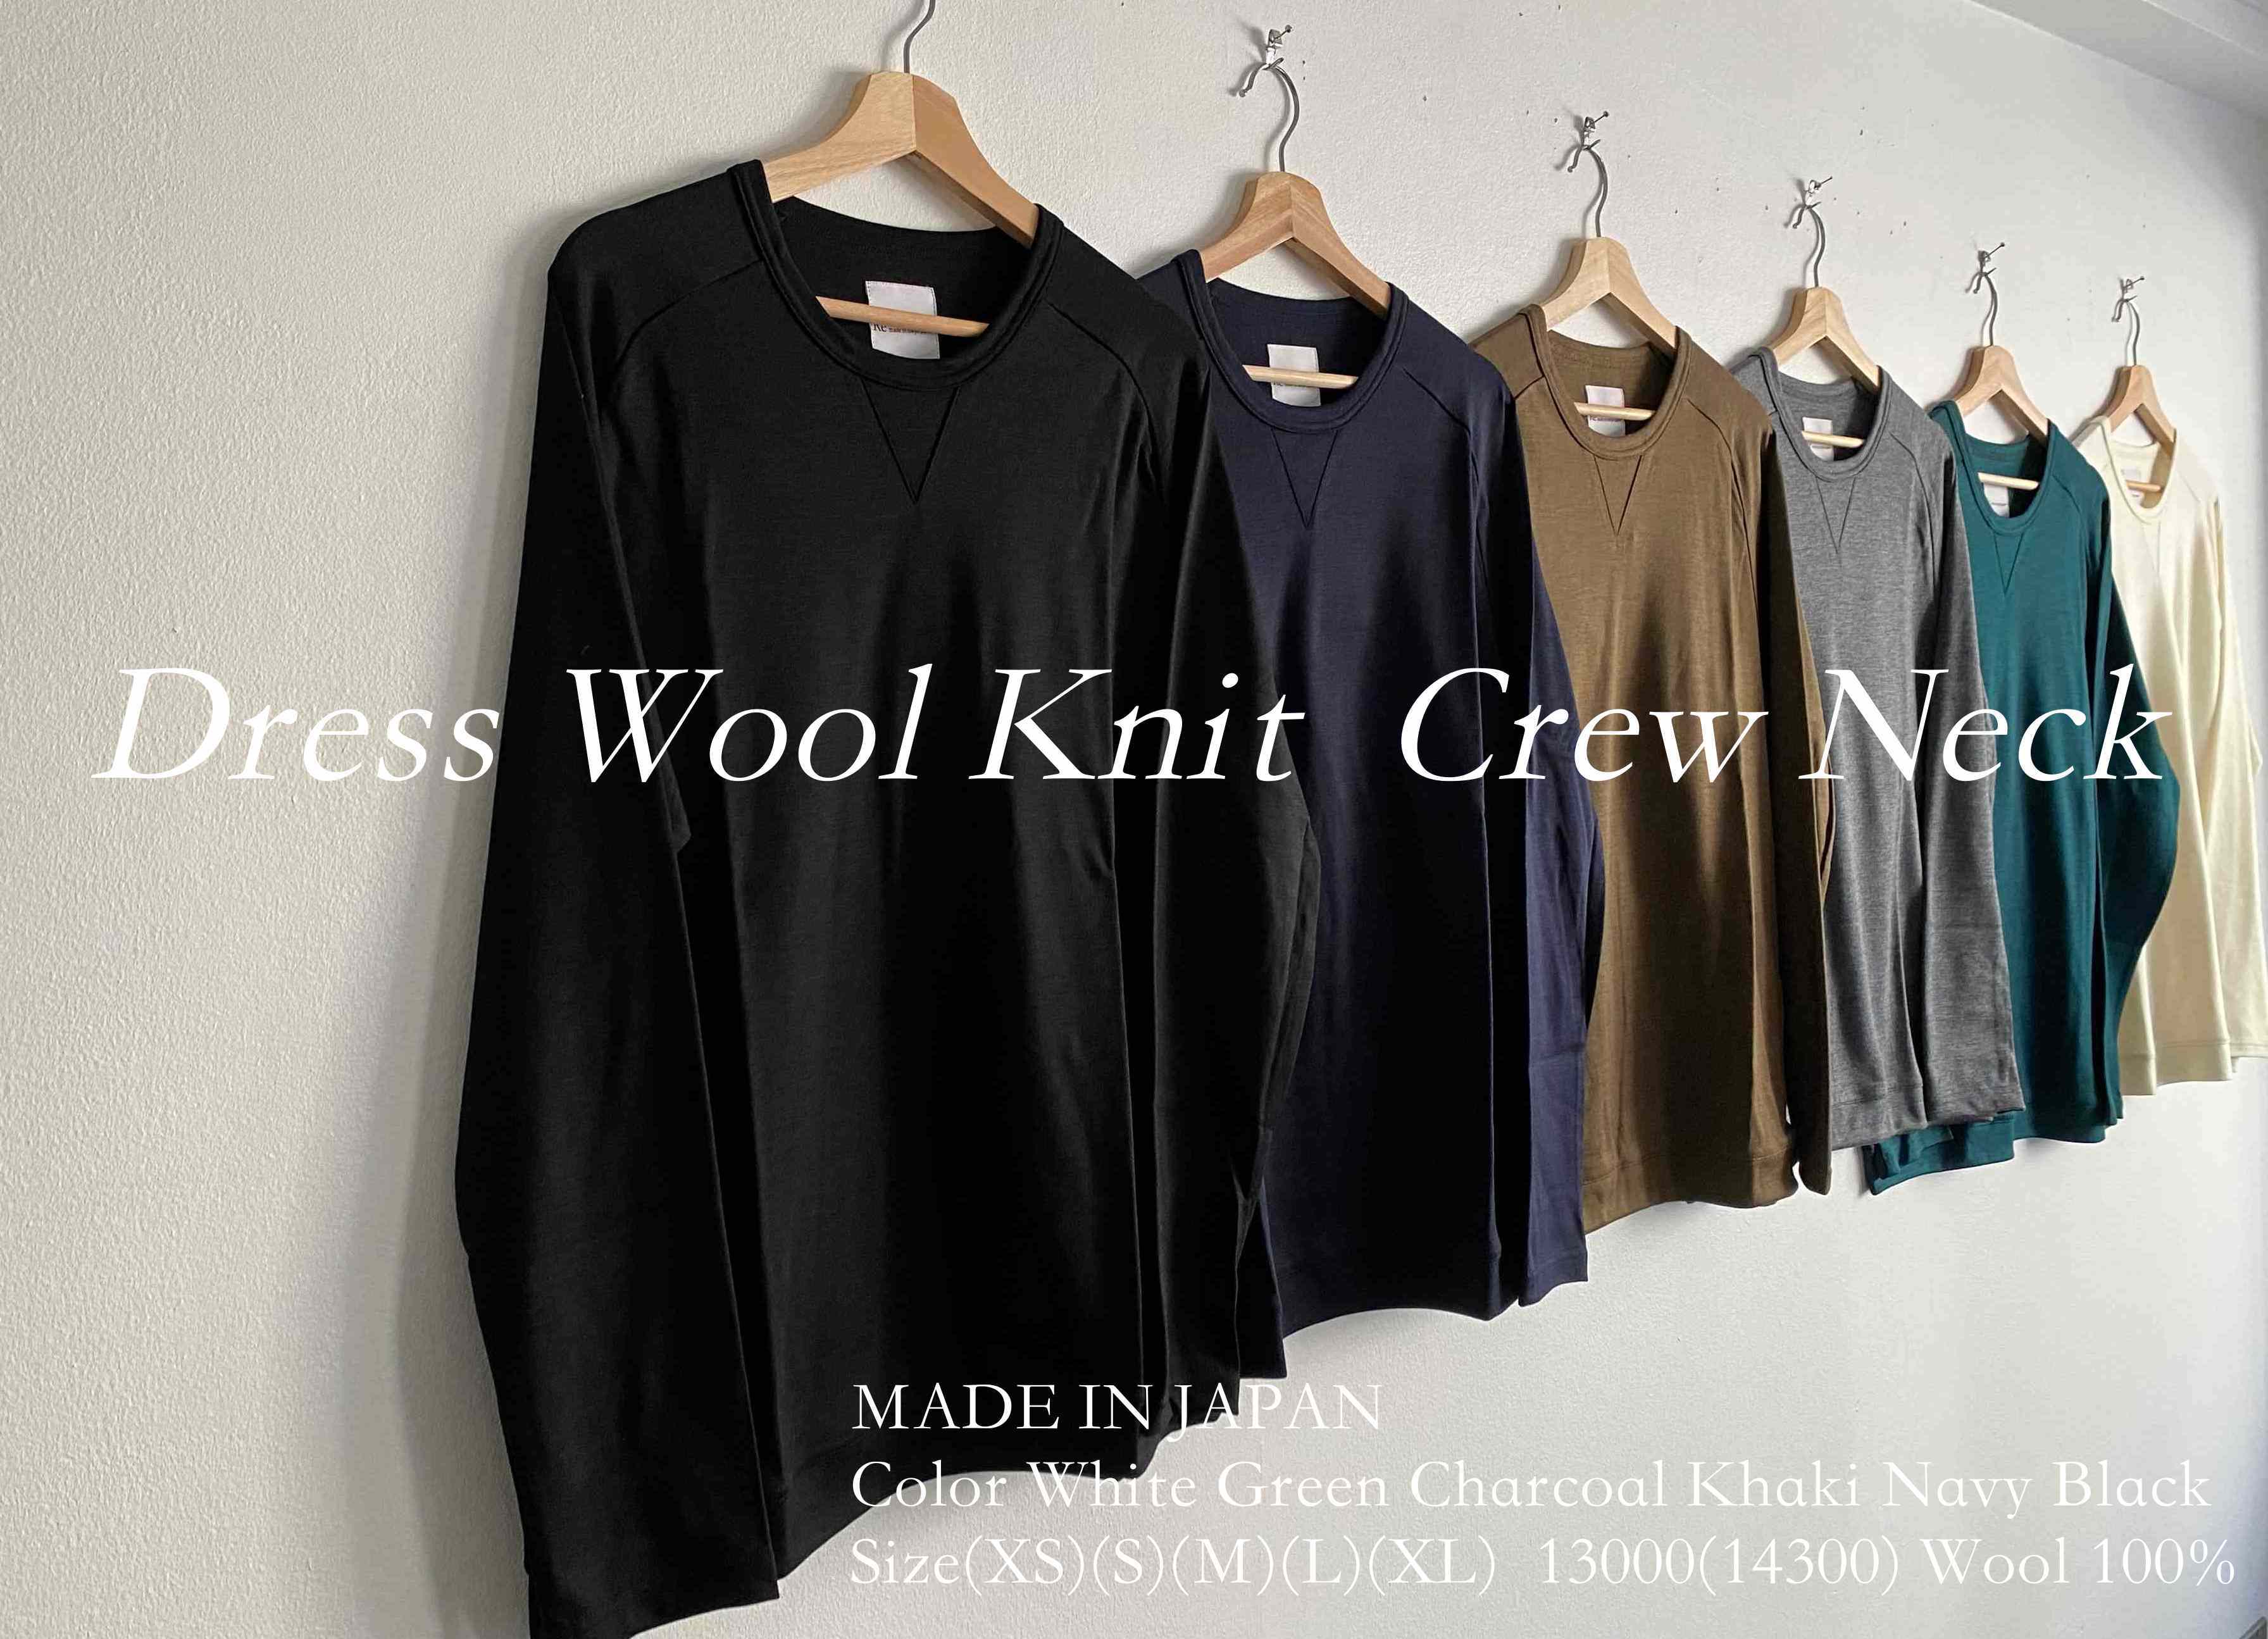 Dress Wool Knit Crew Neck : 【Re made in tokyo japan】NEW ITEM INFO